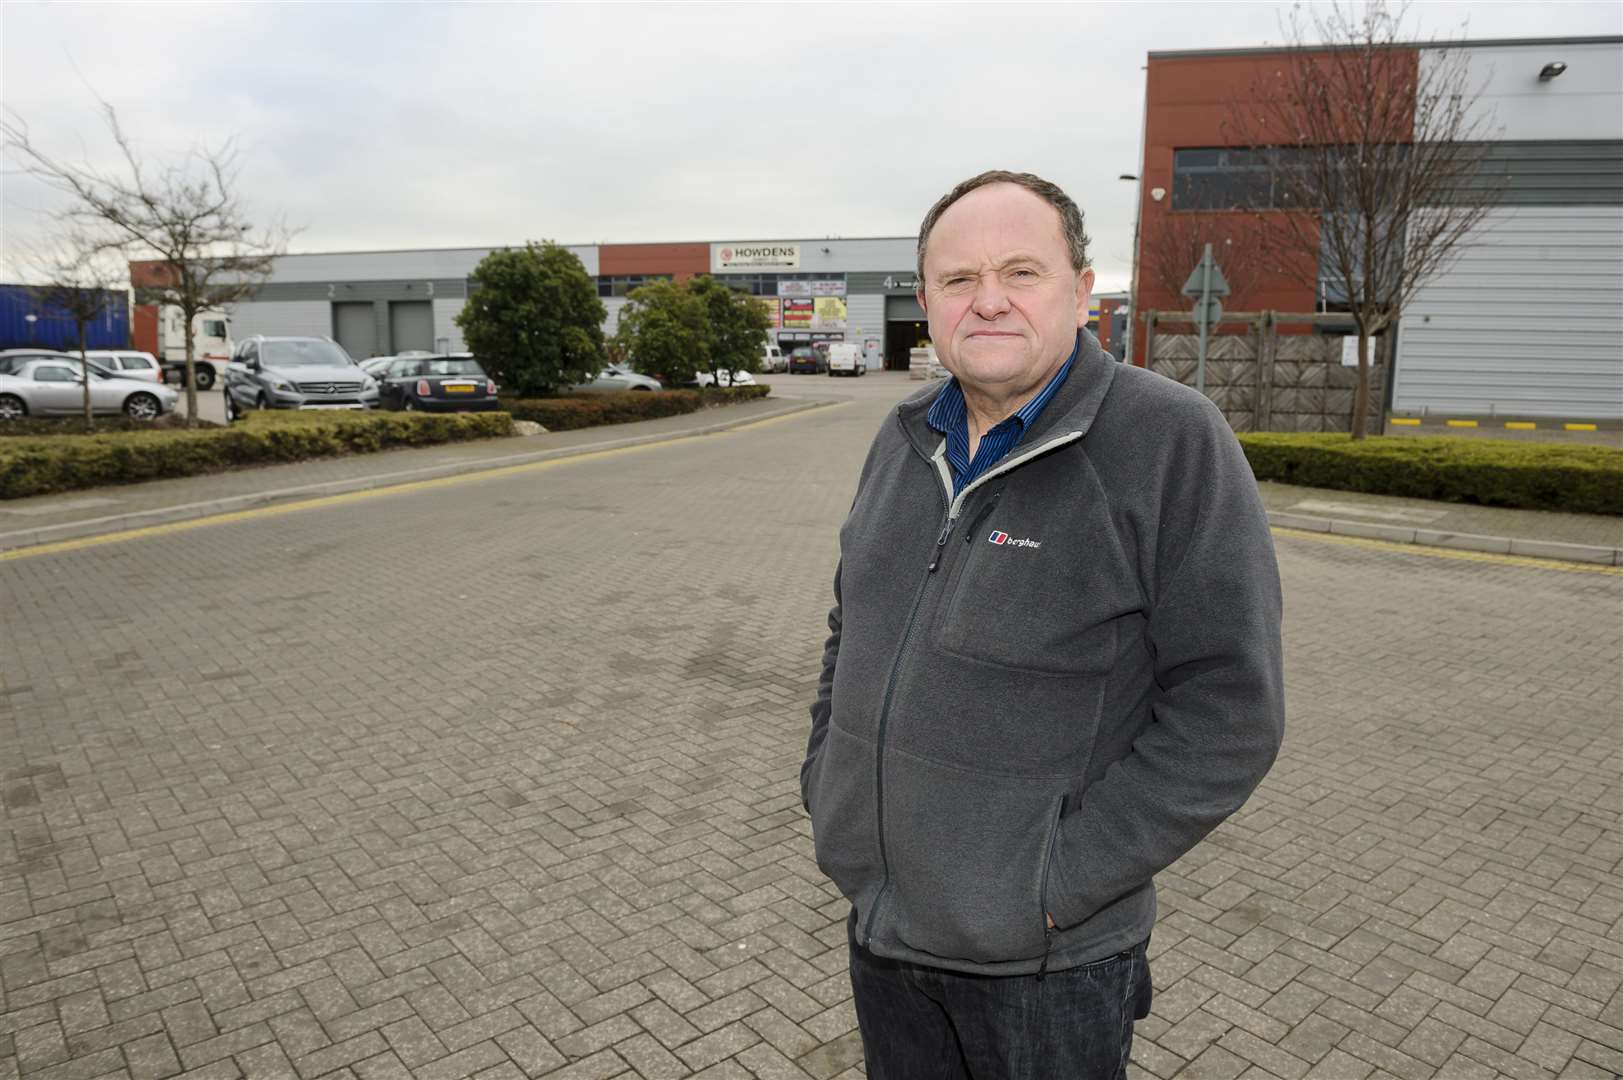 Cllr Peter Harman, from the Swanscombe and Greenhithe Residents Assoication, wants Kent County Council to scrap the tip charges